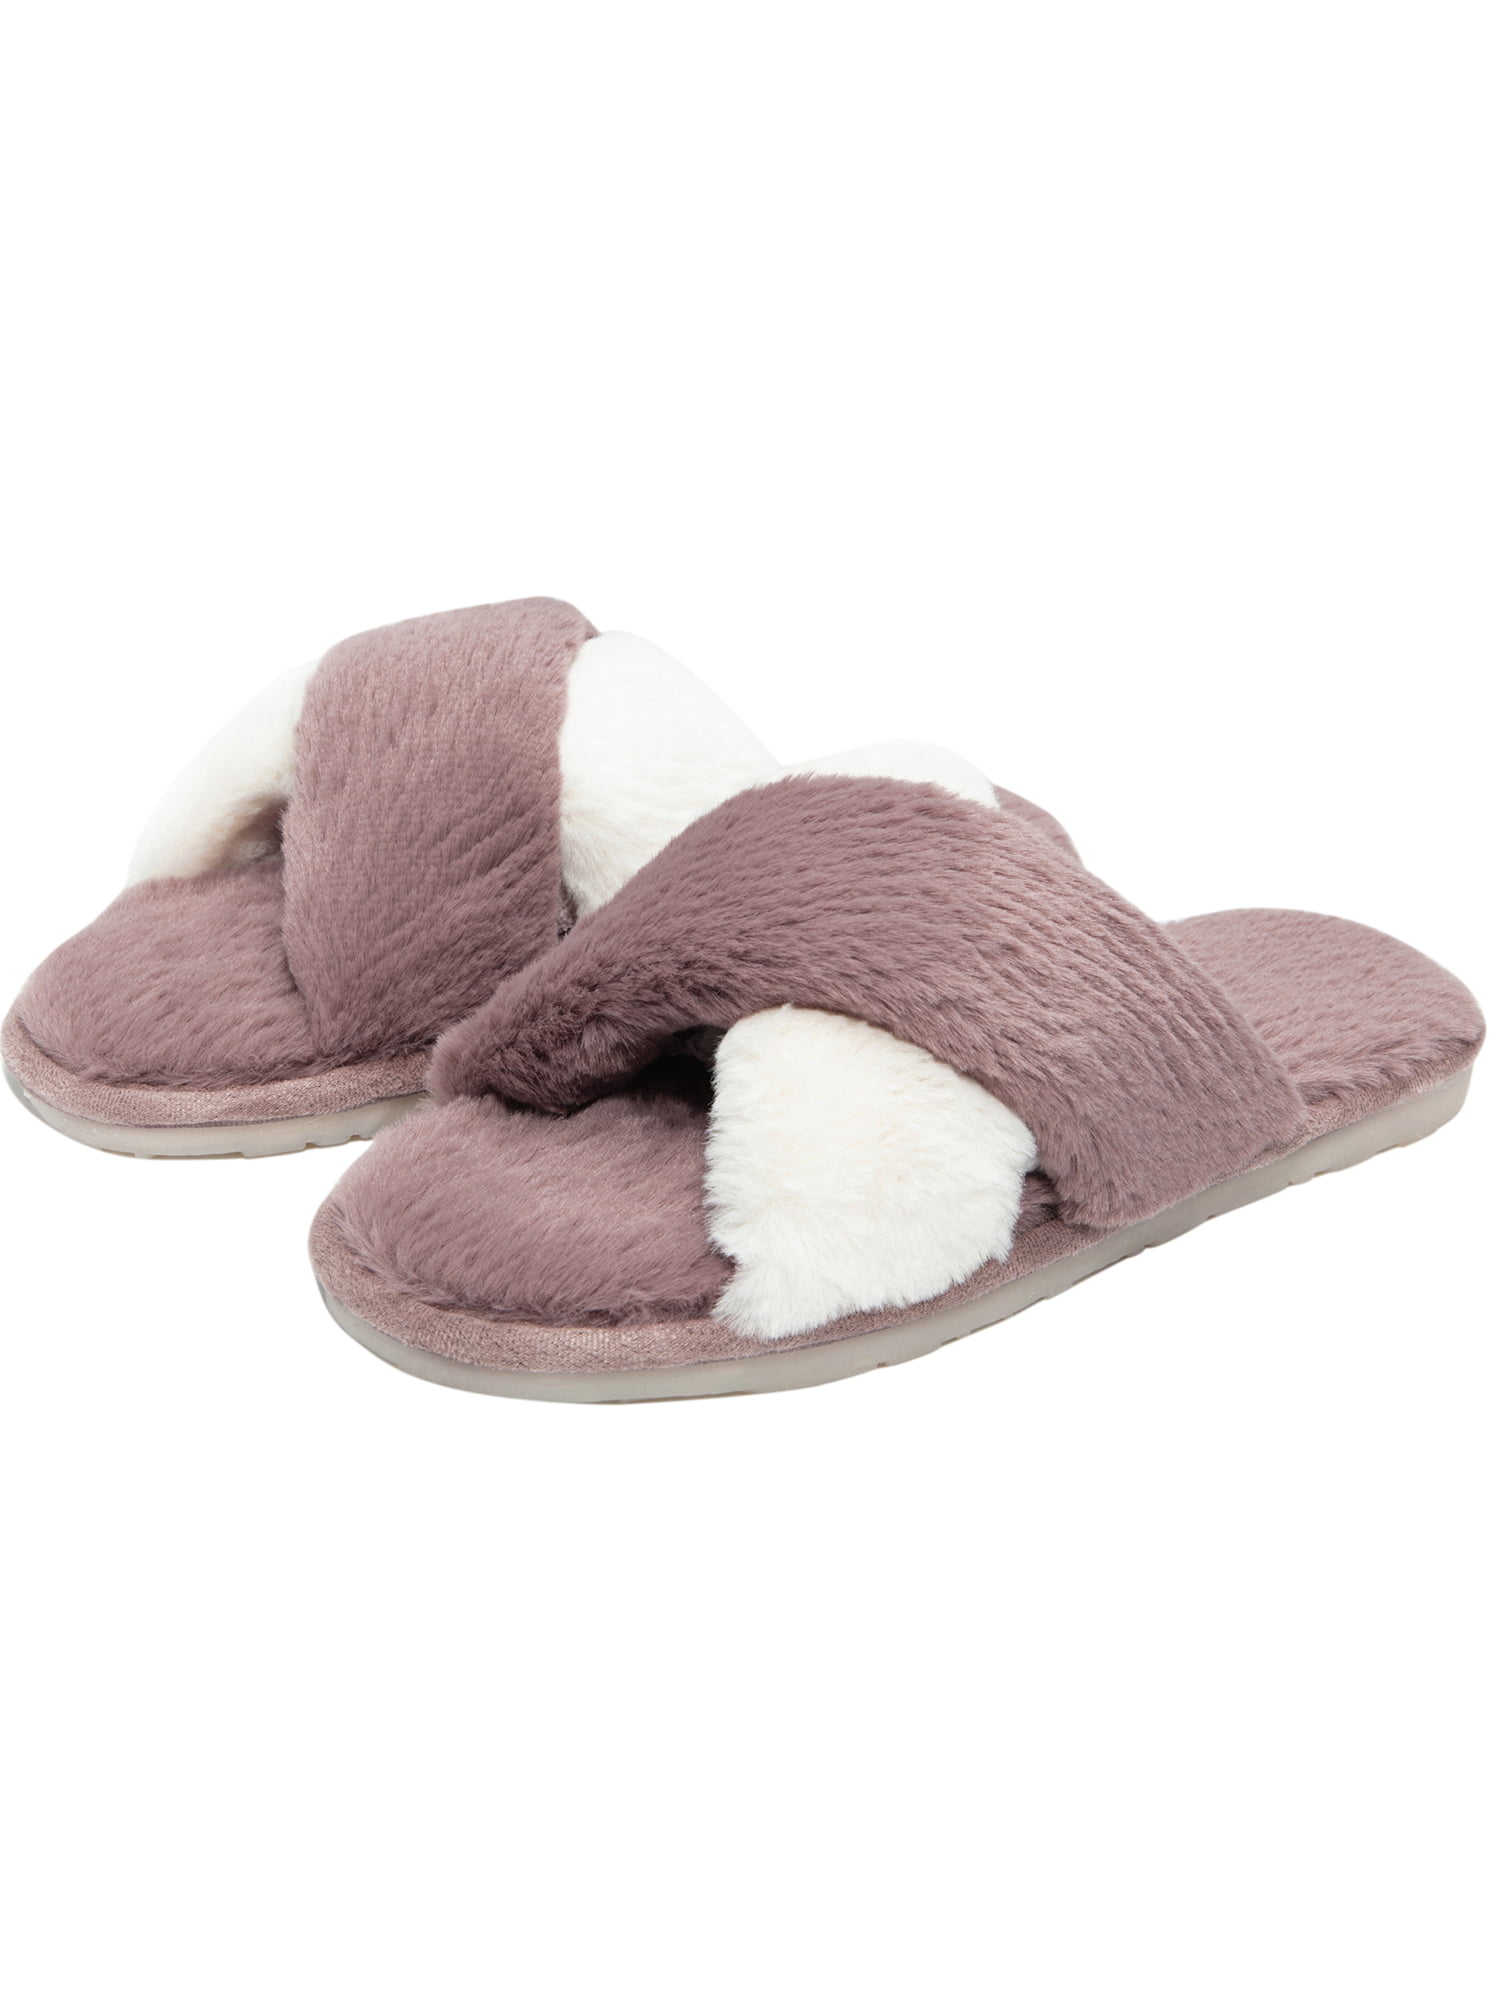 Unisex Winter Warm Fleece Slippers Fluffy Plush Sandals Indoor Home Casual Shoes